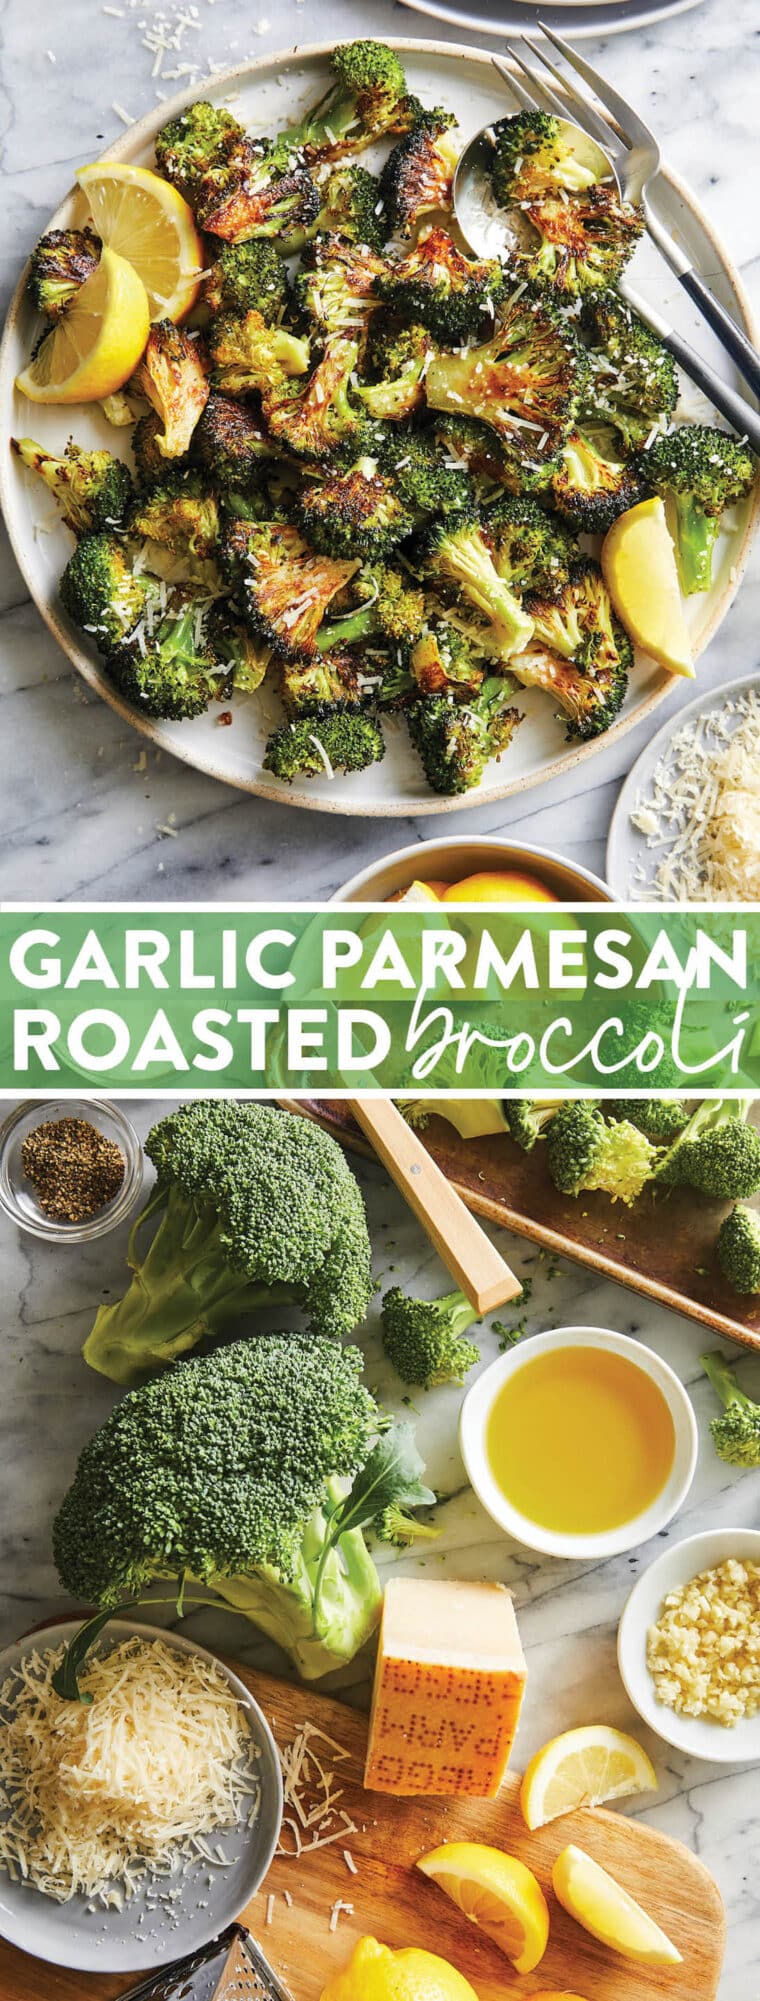 Garlic Parmesan Roasted Broccoli - This comes together so quickly with just 5 min prep. It's the perfect and easiest side dish to any meal!